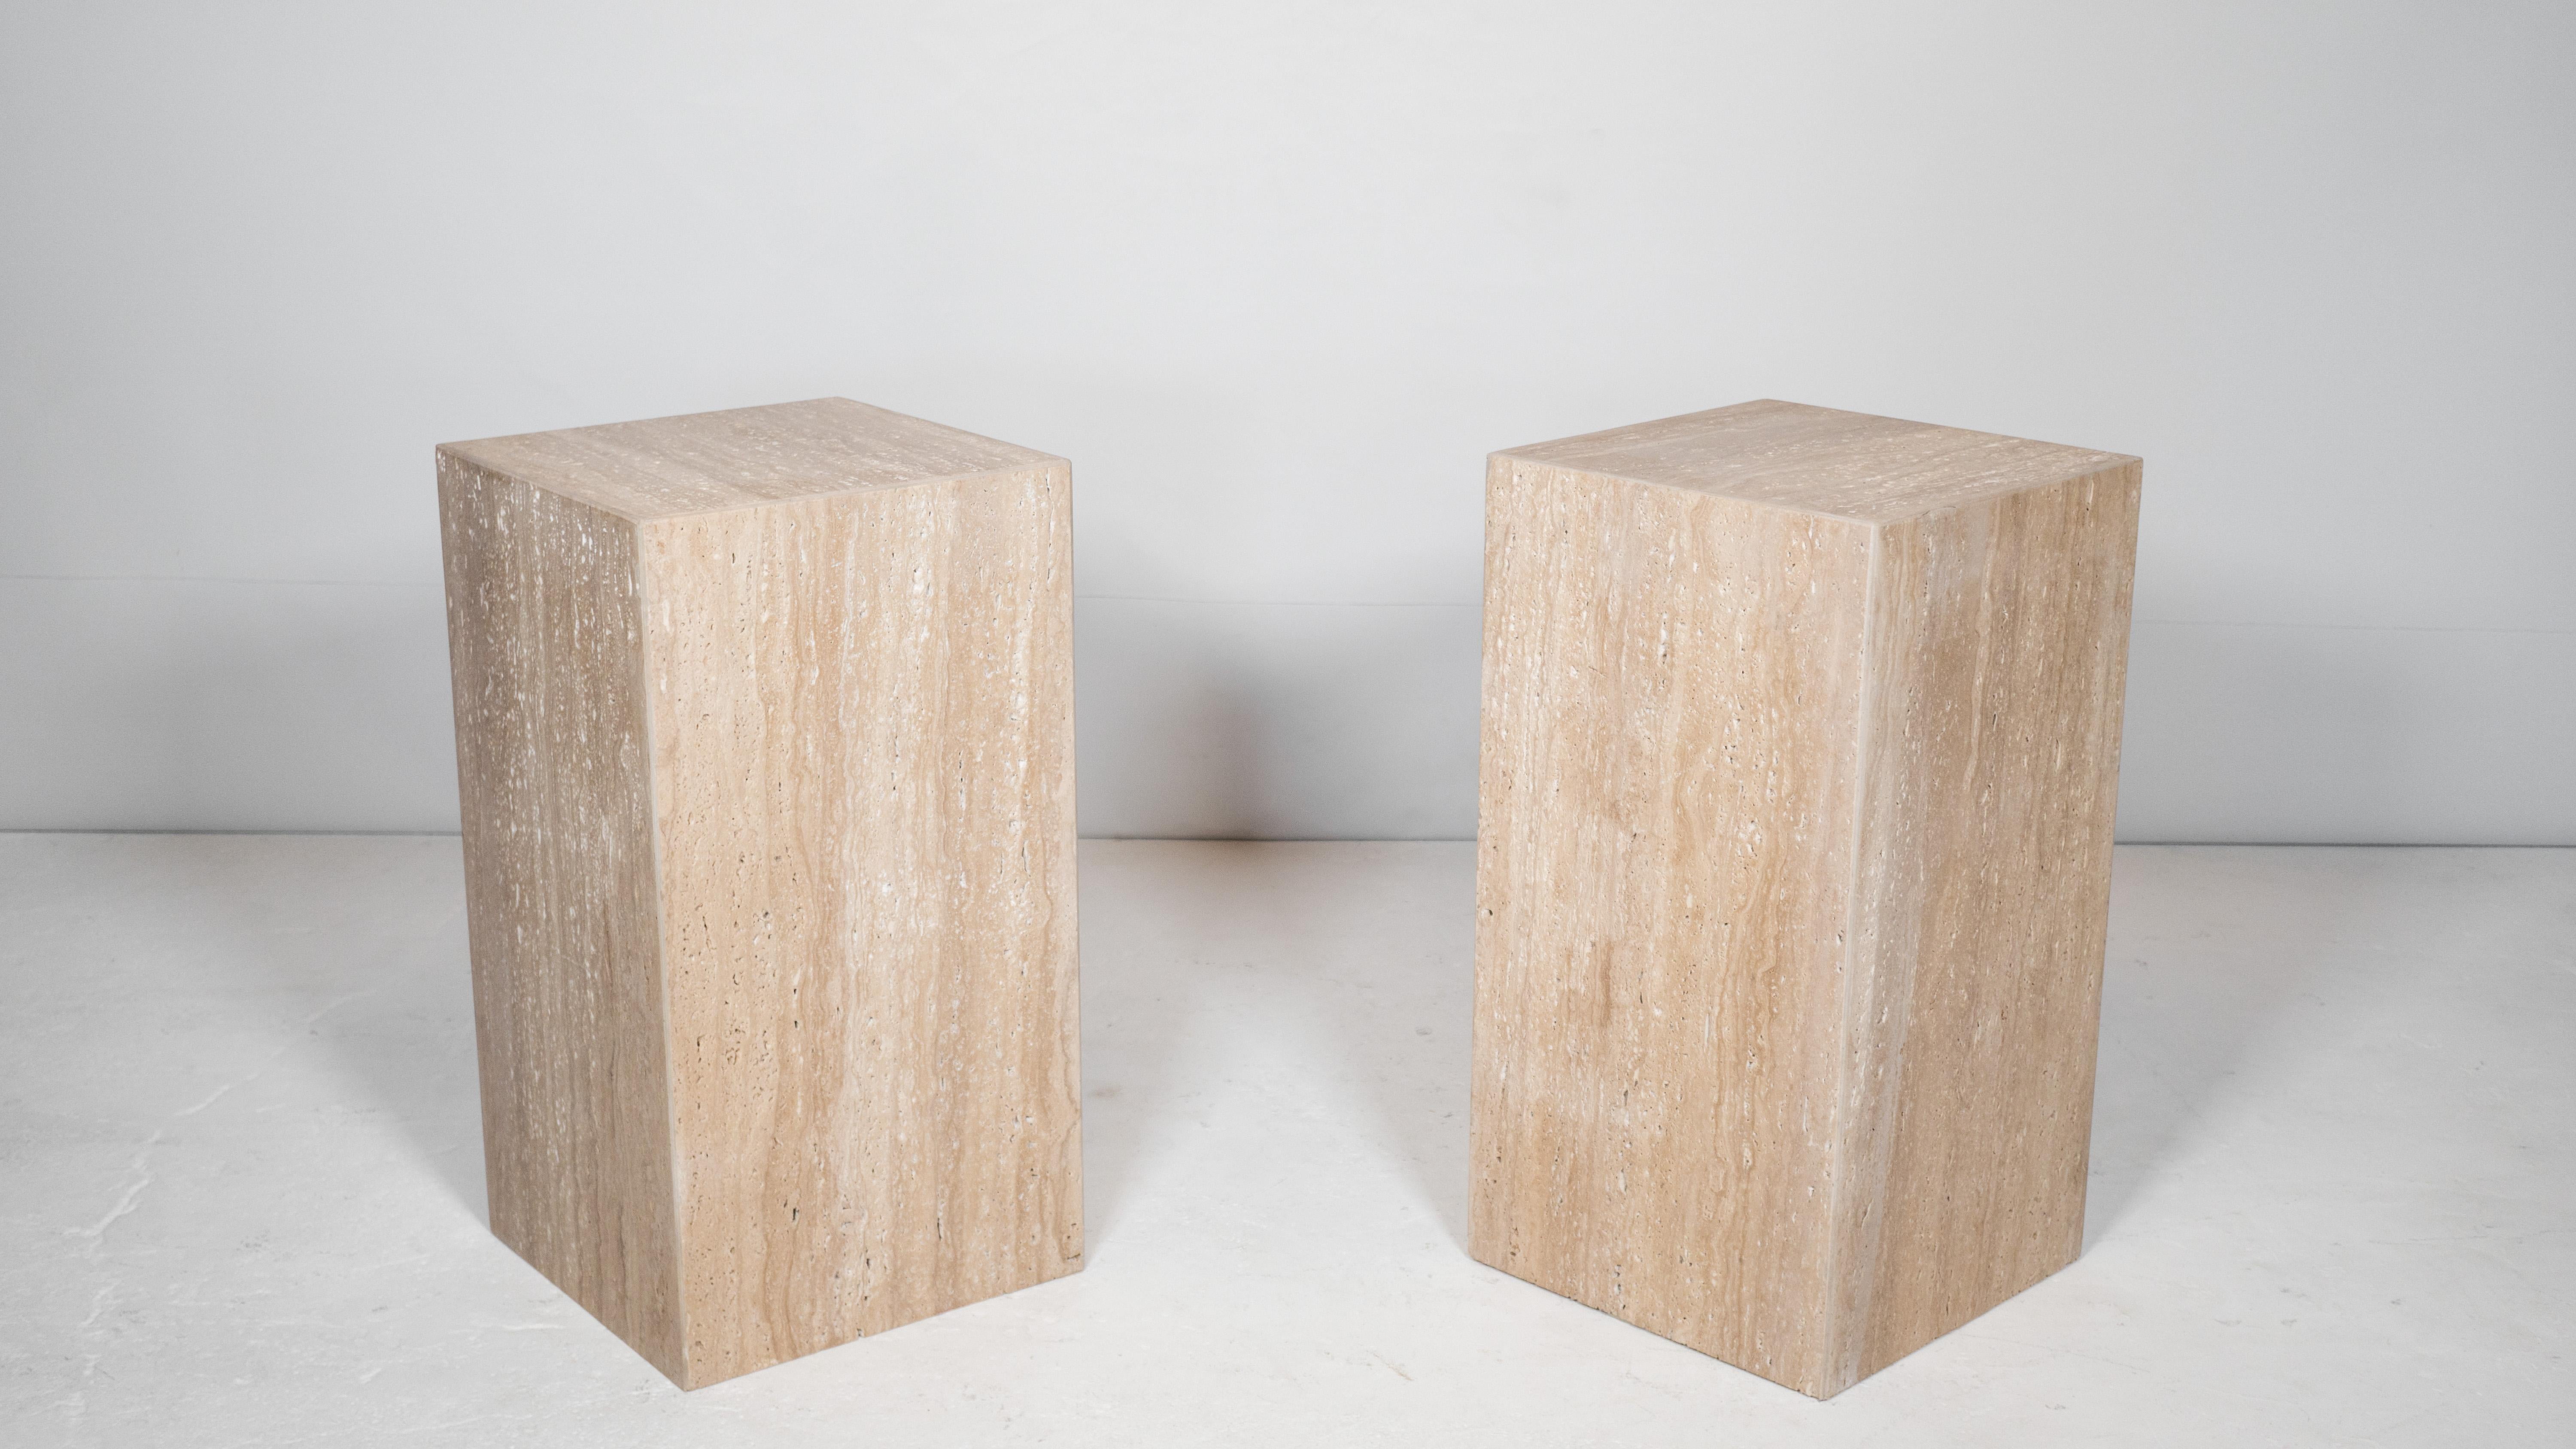 1980s Italian Travertine Tower Cube Side Tables - a Pair For Sale 3